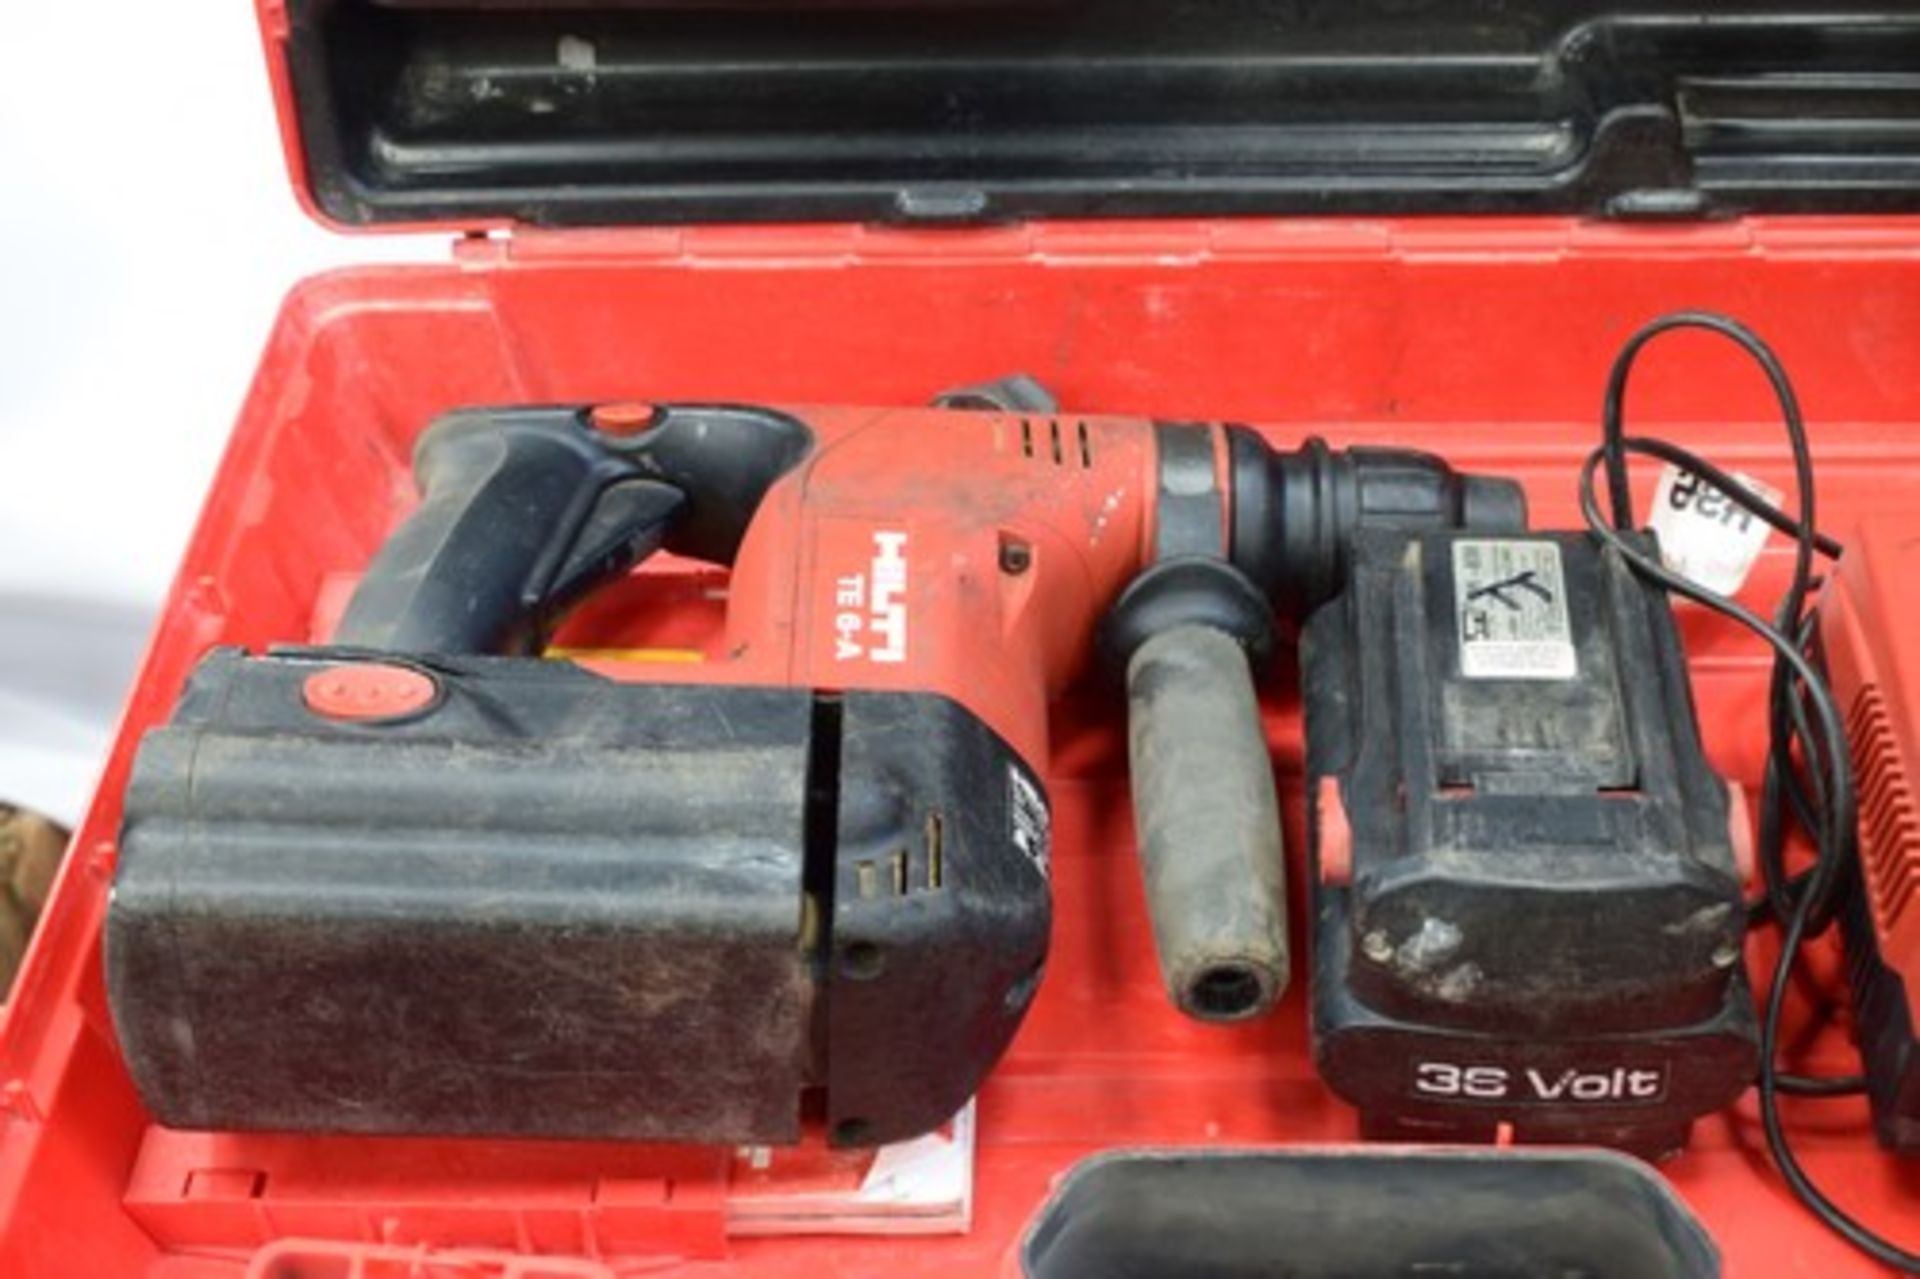 1 x Hilti cordless hammer drill, model: TE 6-A, 36v 12amp and charger - working, sold with a faulty - Image 2 of 3